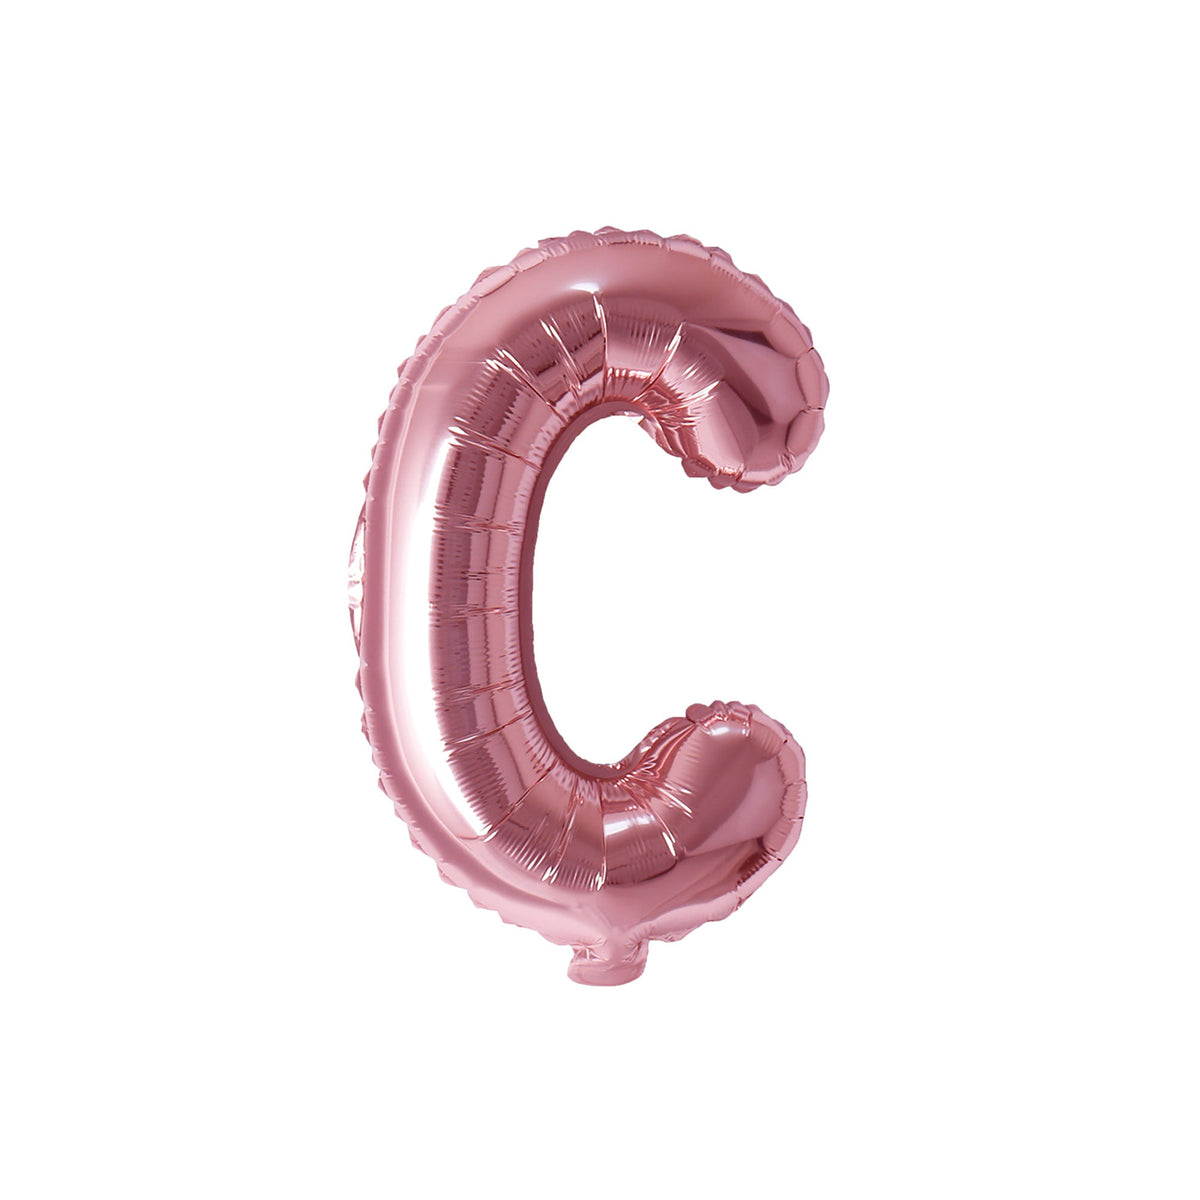 PARTY EXPERT Balloons Rose Gold Letter C Foil Balloon, 16 Inches, 1 Count 810064194214